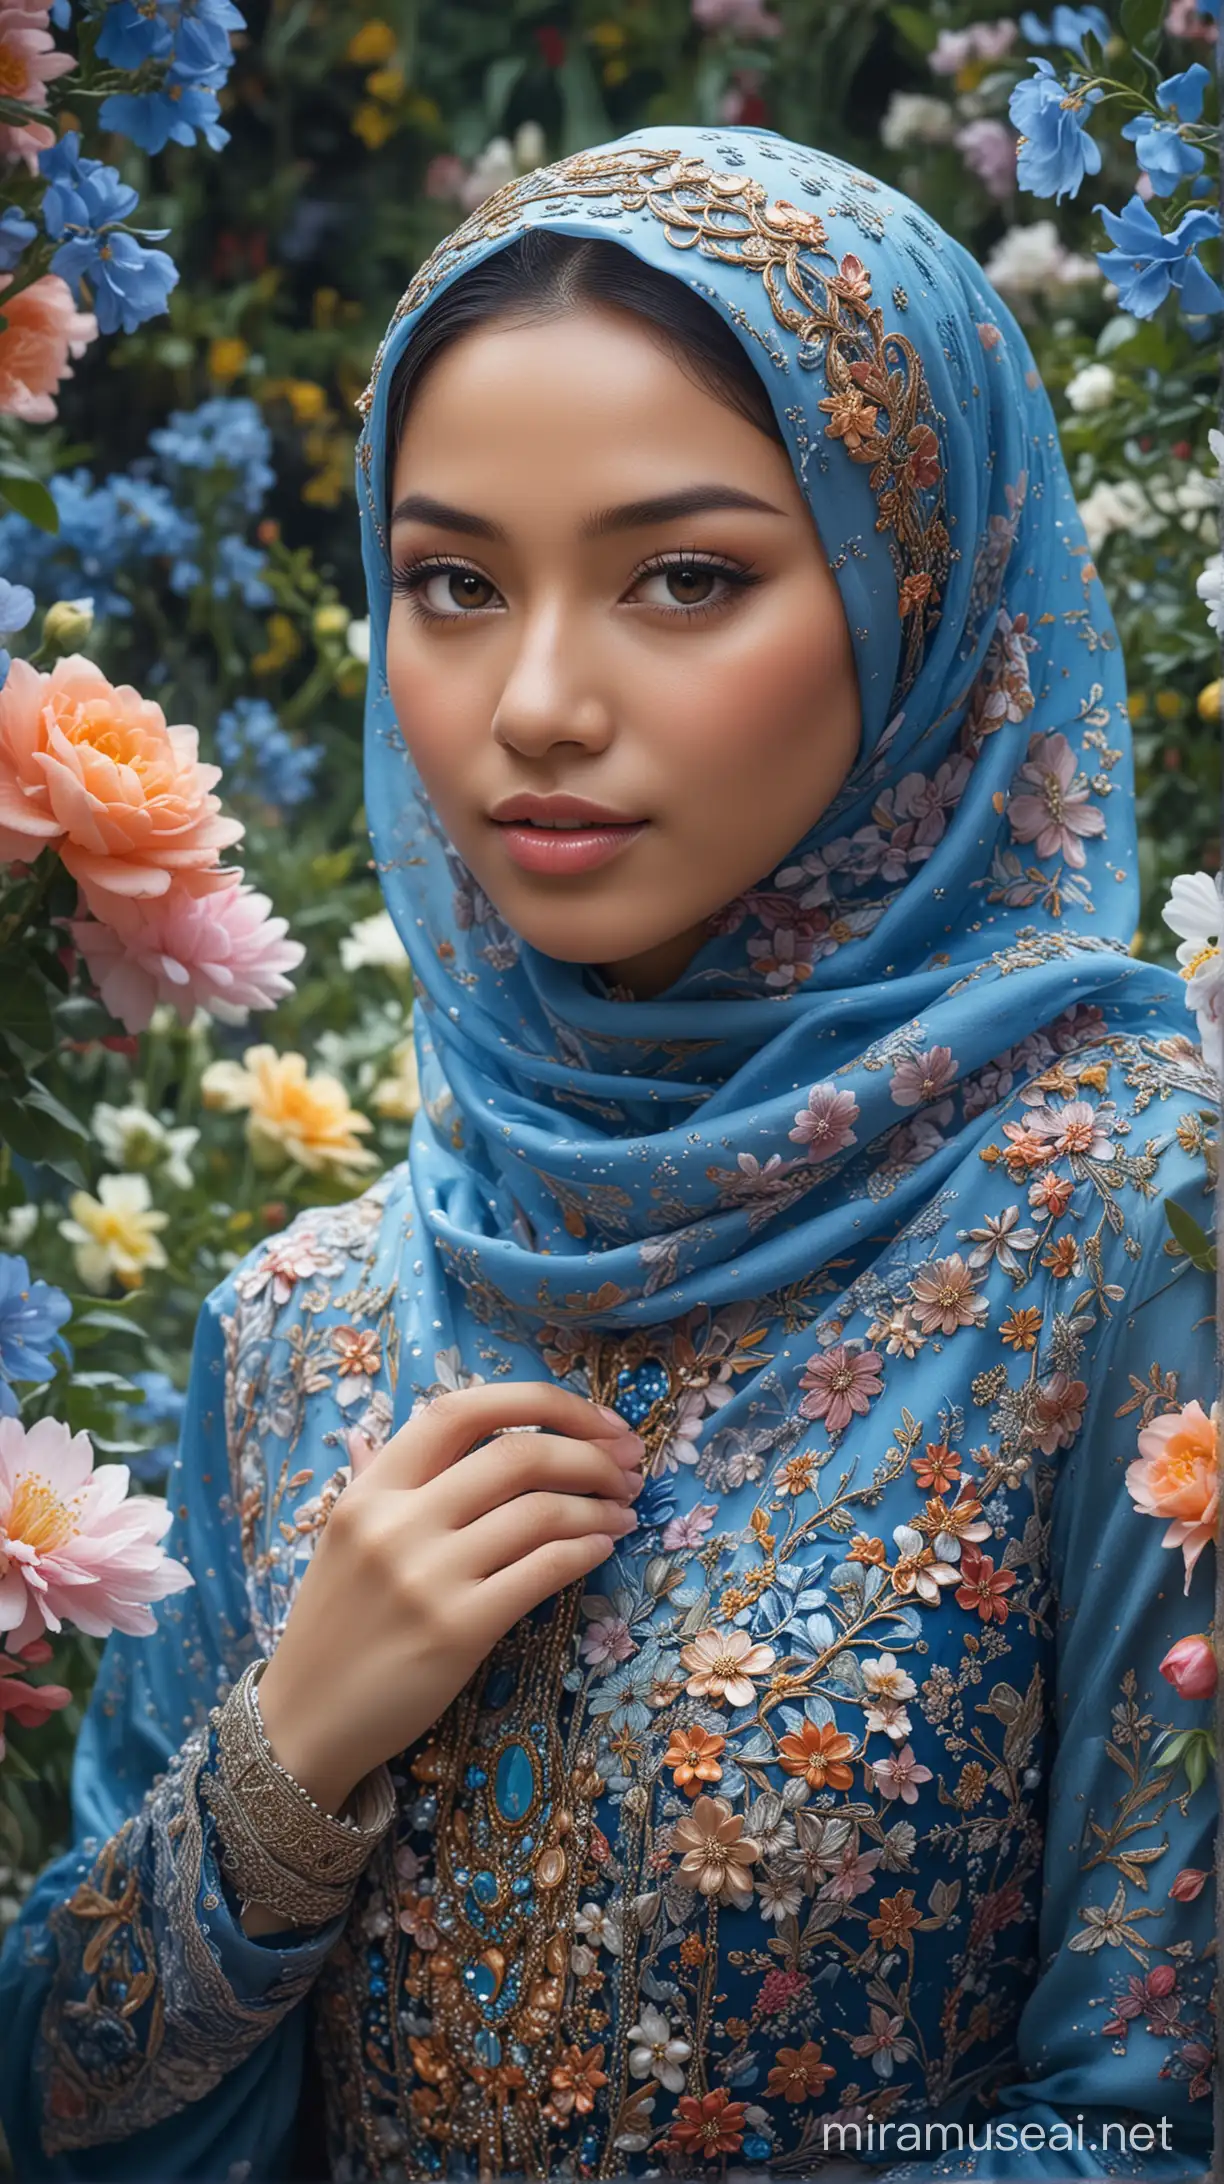 Indonesian Girl in Elegant Blue Dress Surrounded by Blossoming Flowers